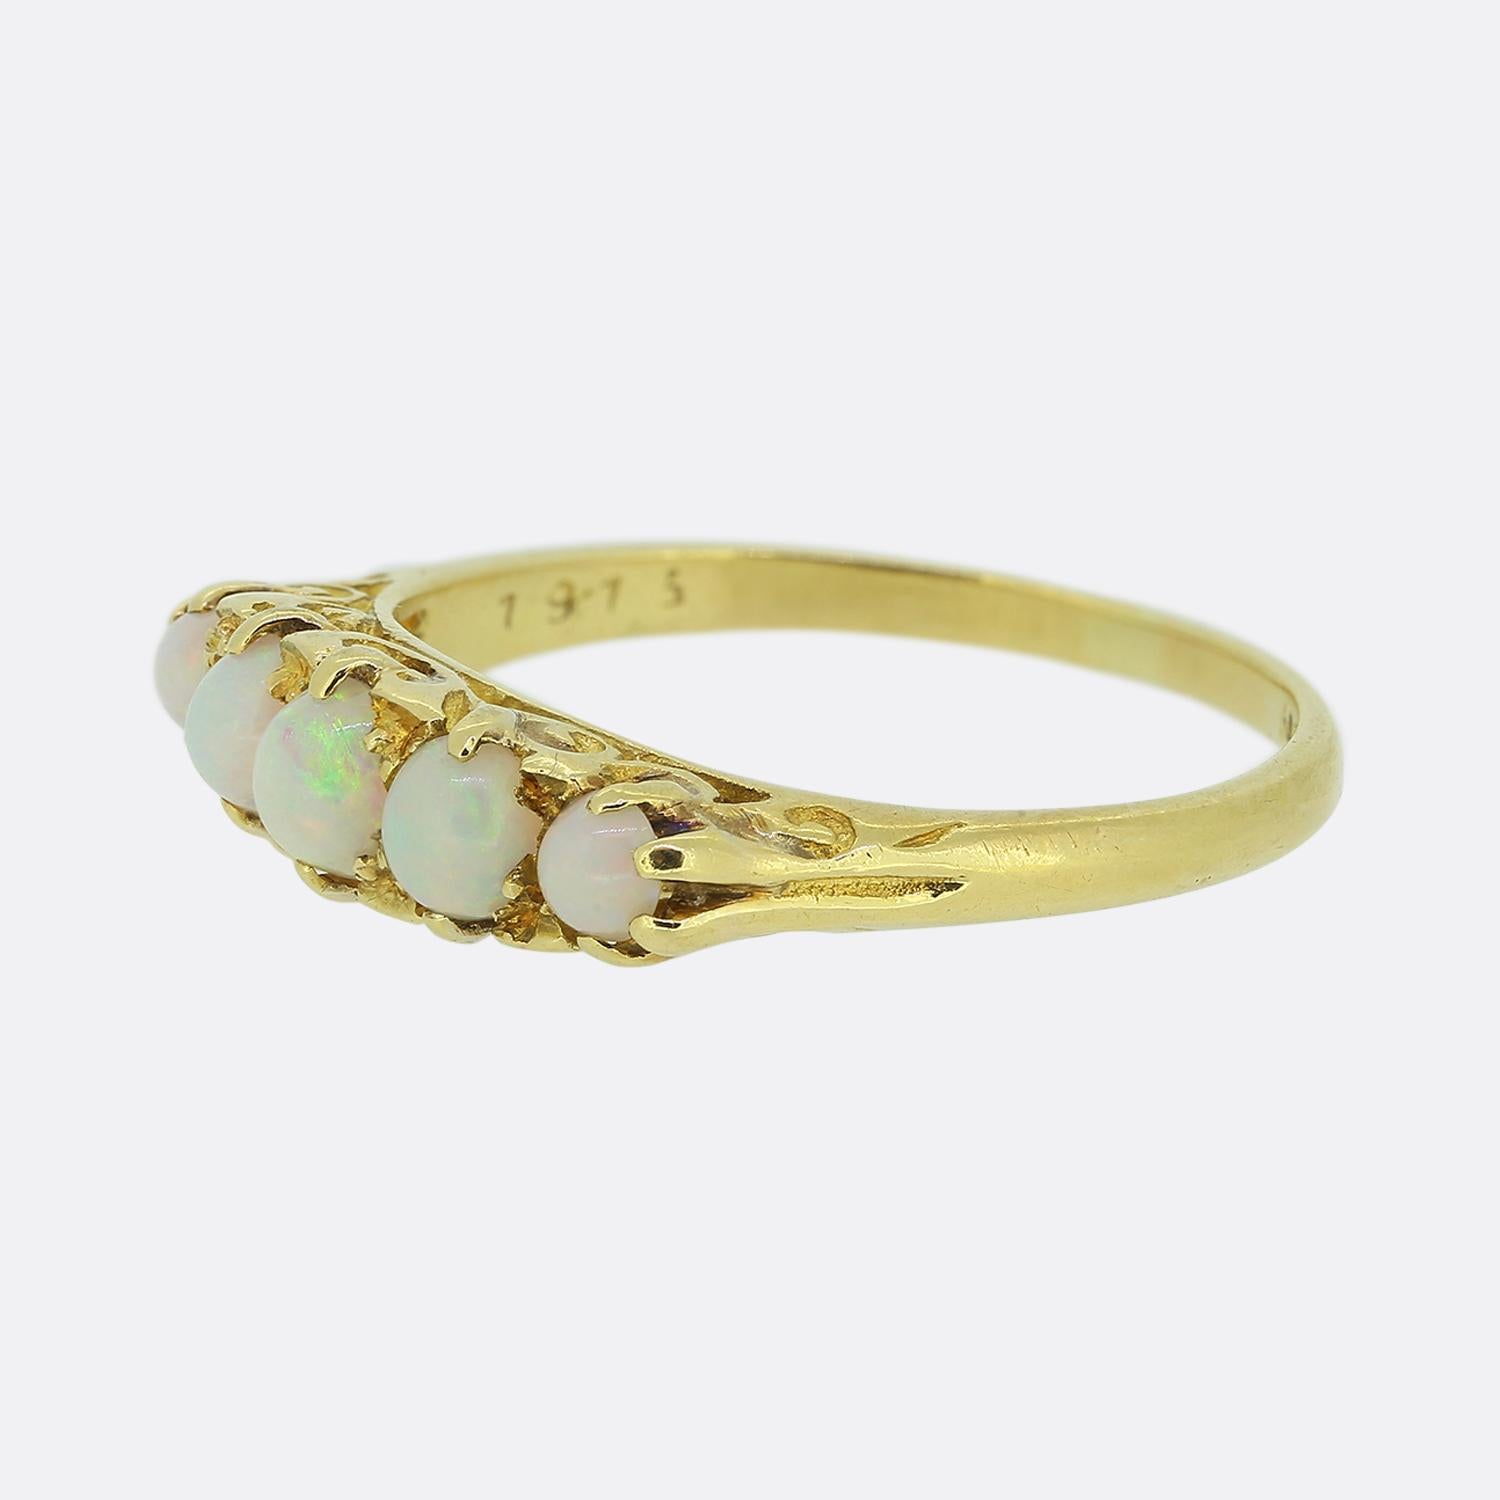 Here we have a beautiful, classically styled, five-stone ring dating back to the Victorian period. This antique piece has been crafted from 18ct yellow gold and features five round shaped opals which graduate inwardly in size in a single line